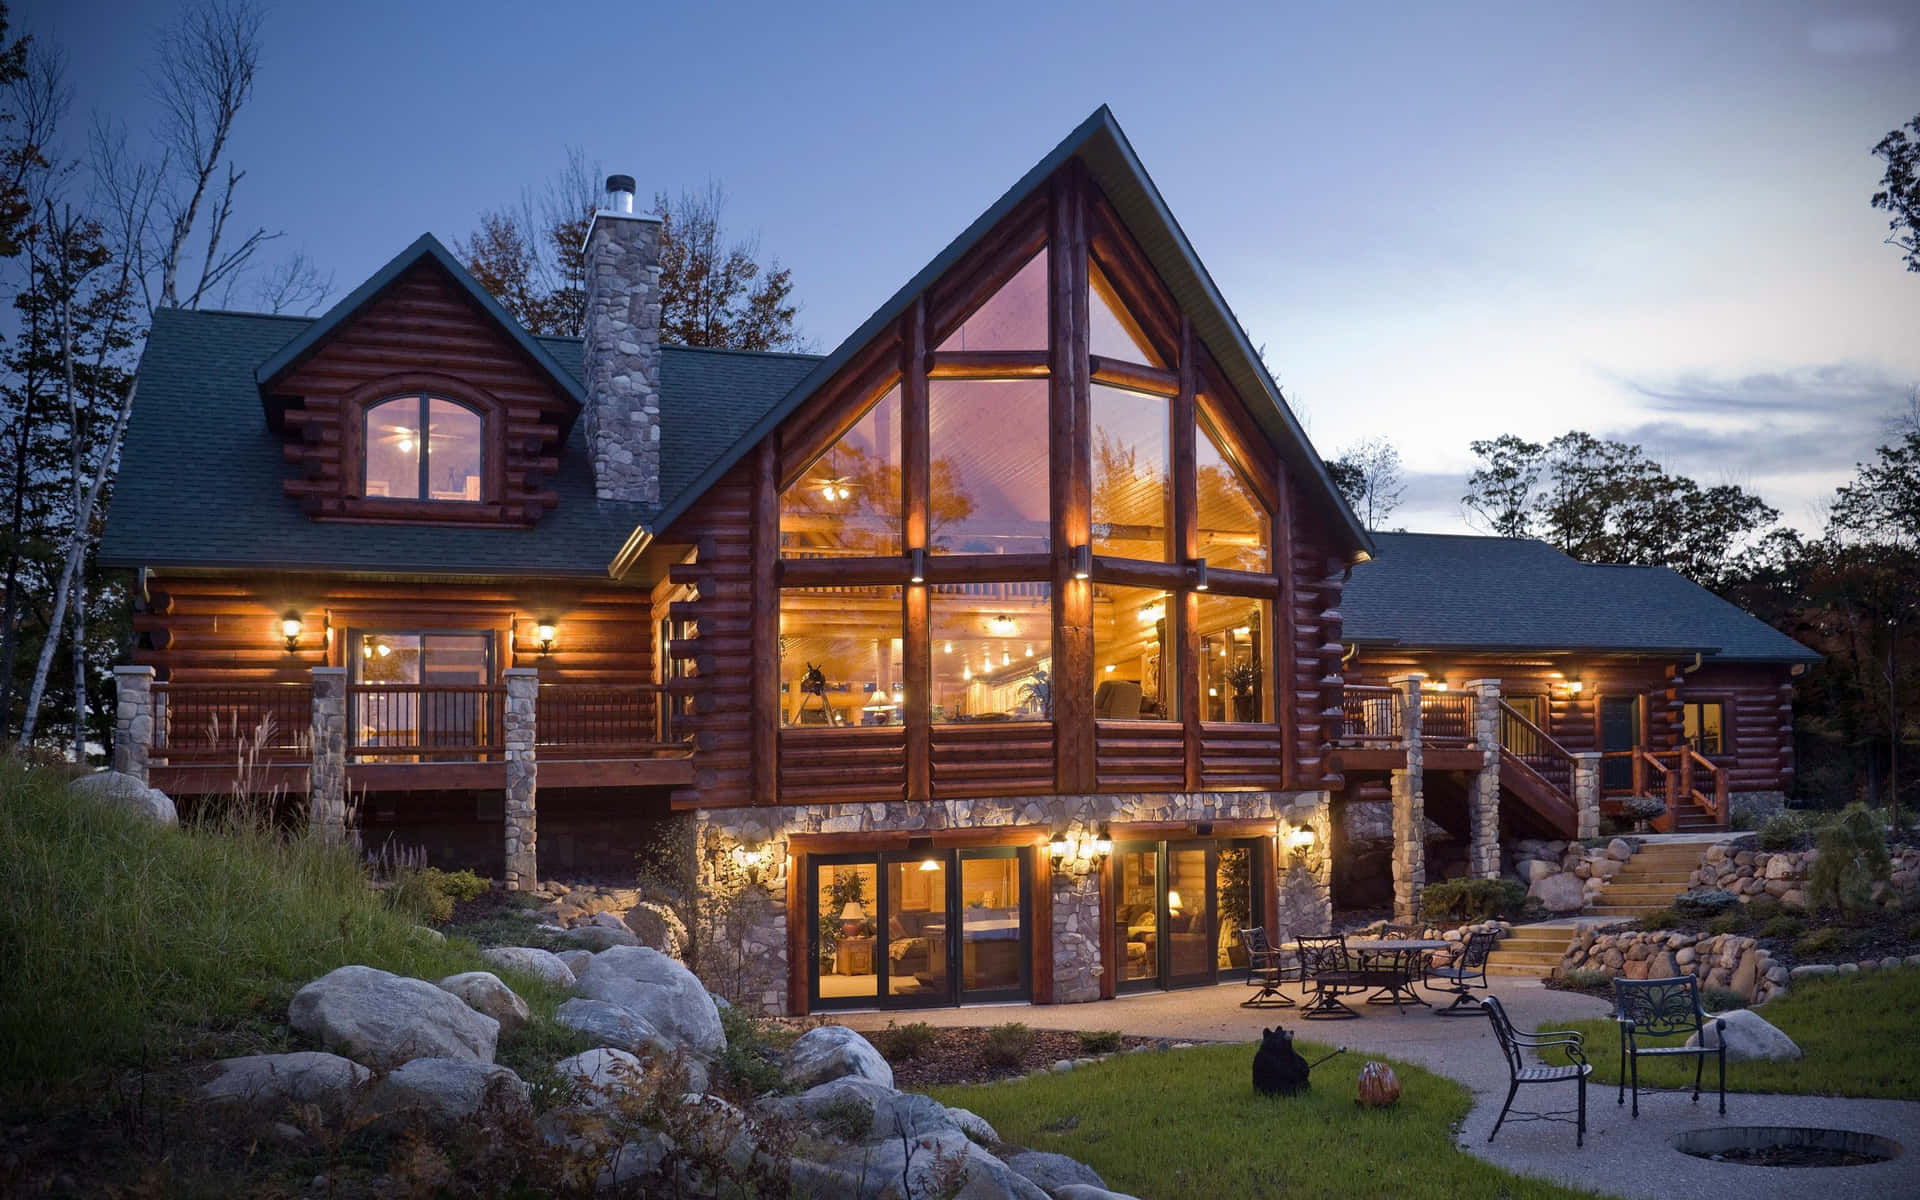 Enjoy the simple pleasures of life in an idyllic log cabin in the woods.